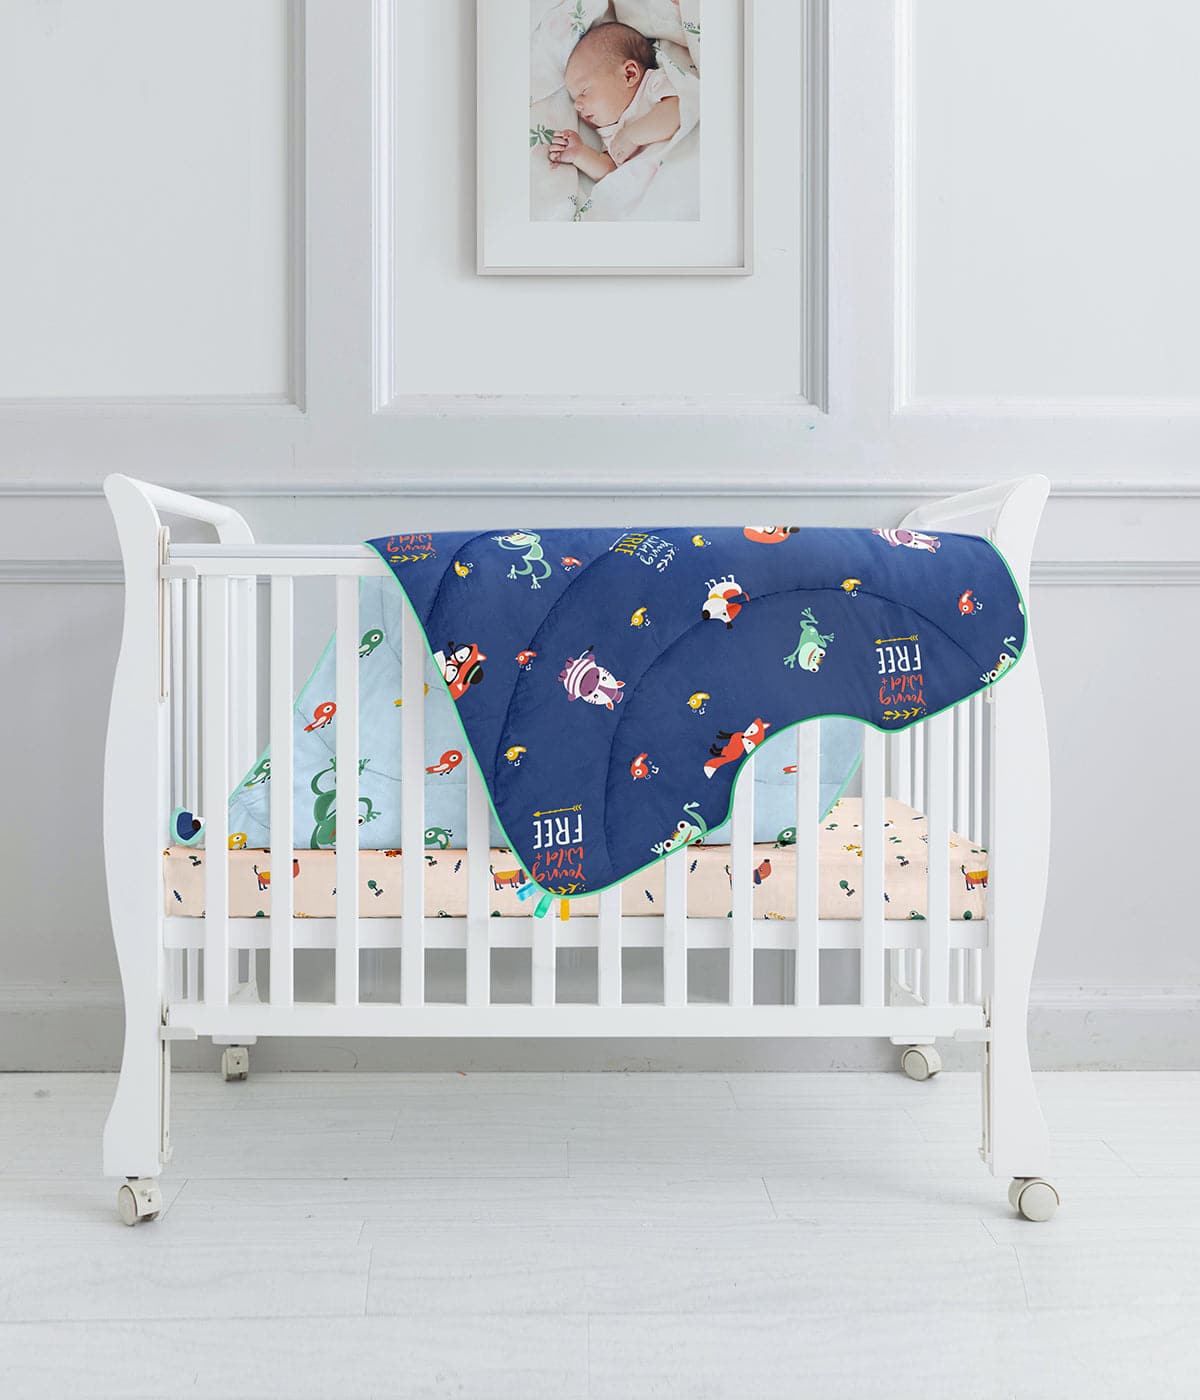 Baby's first bedding set (1 Quilt + 1 Fitted Crib sheet + 1 Sleeping Bag)